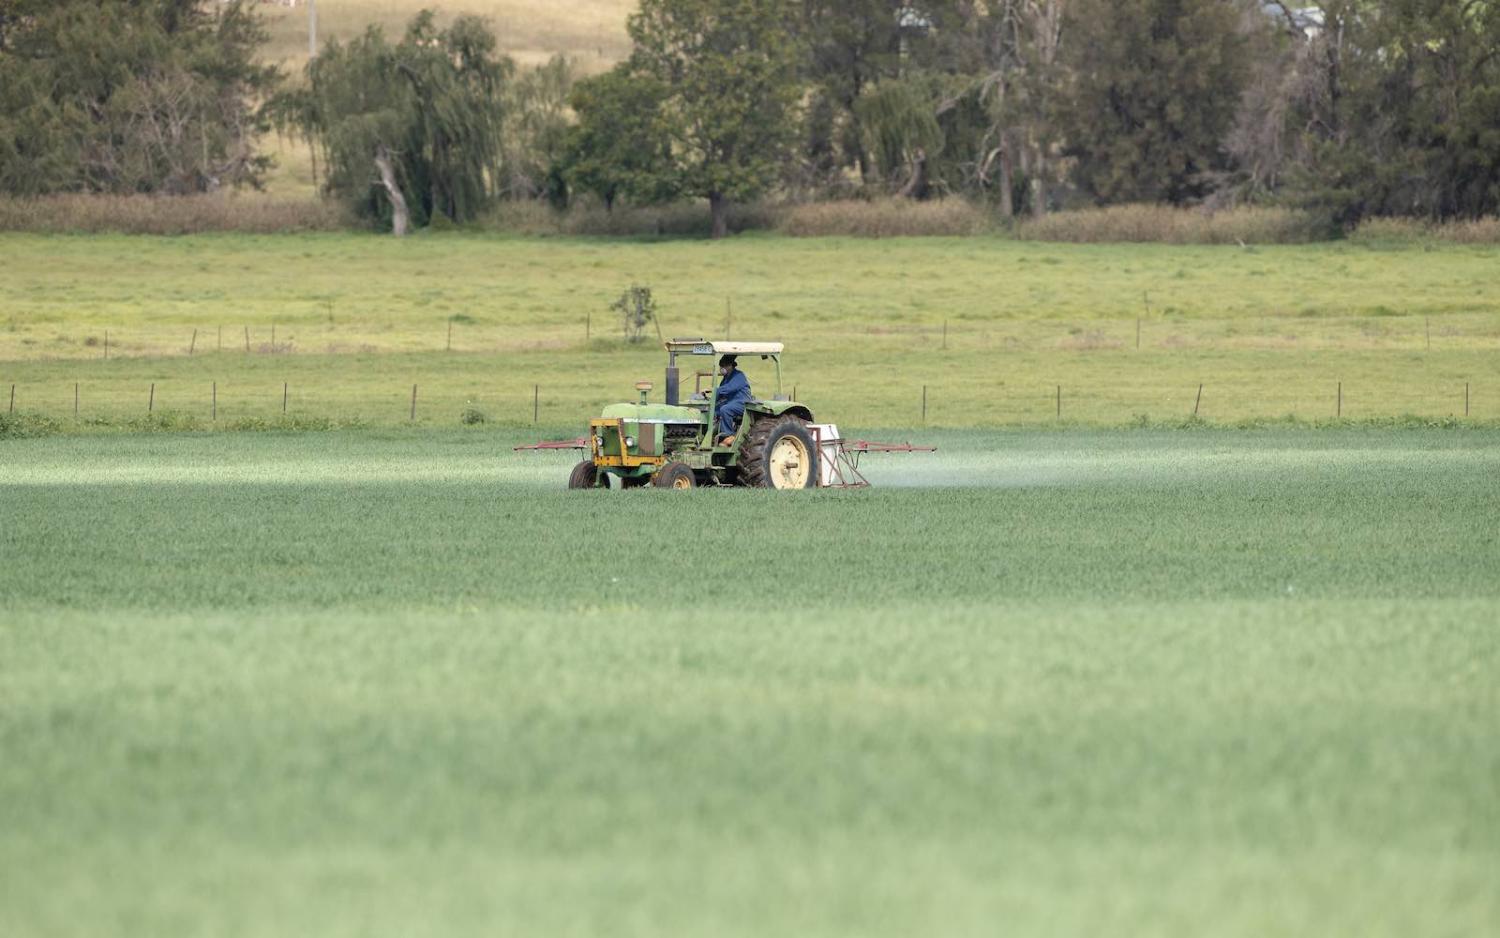 A farmer sprays his crop in Dungowan, north-west New South Wales, Australia, May 2020 (Mark Kolbe/Getty Images)